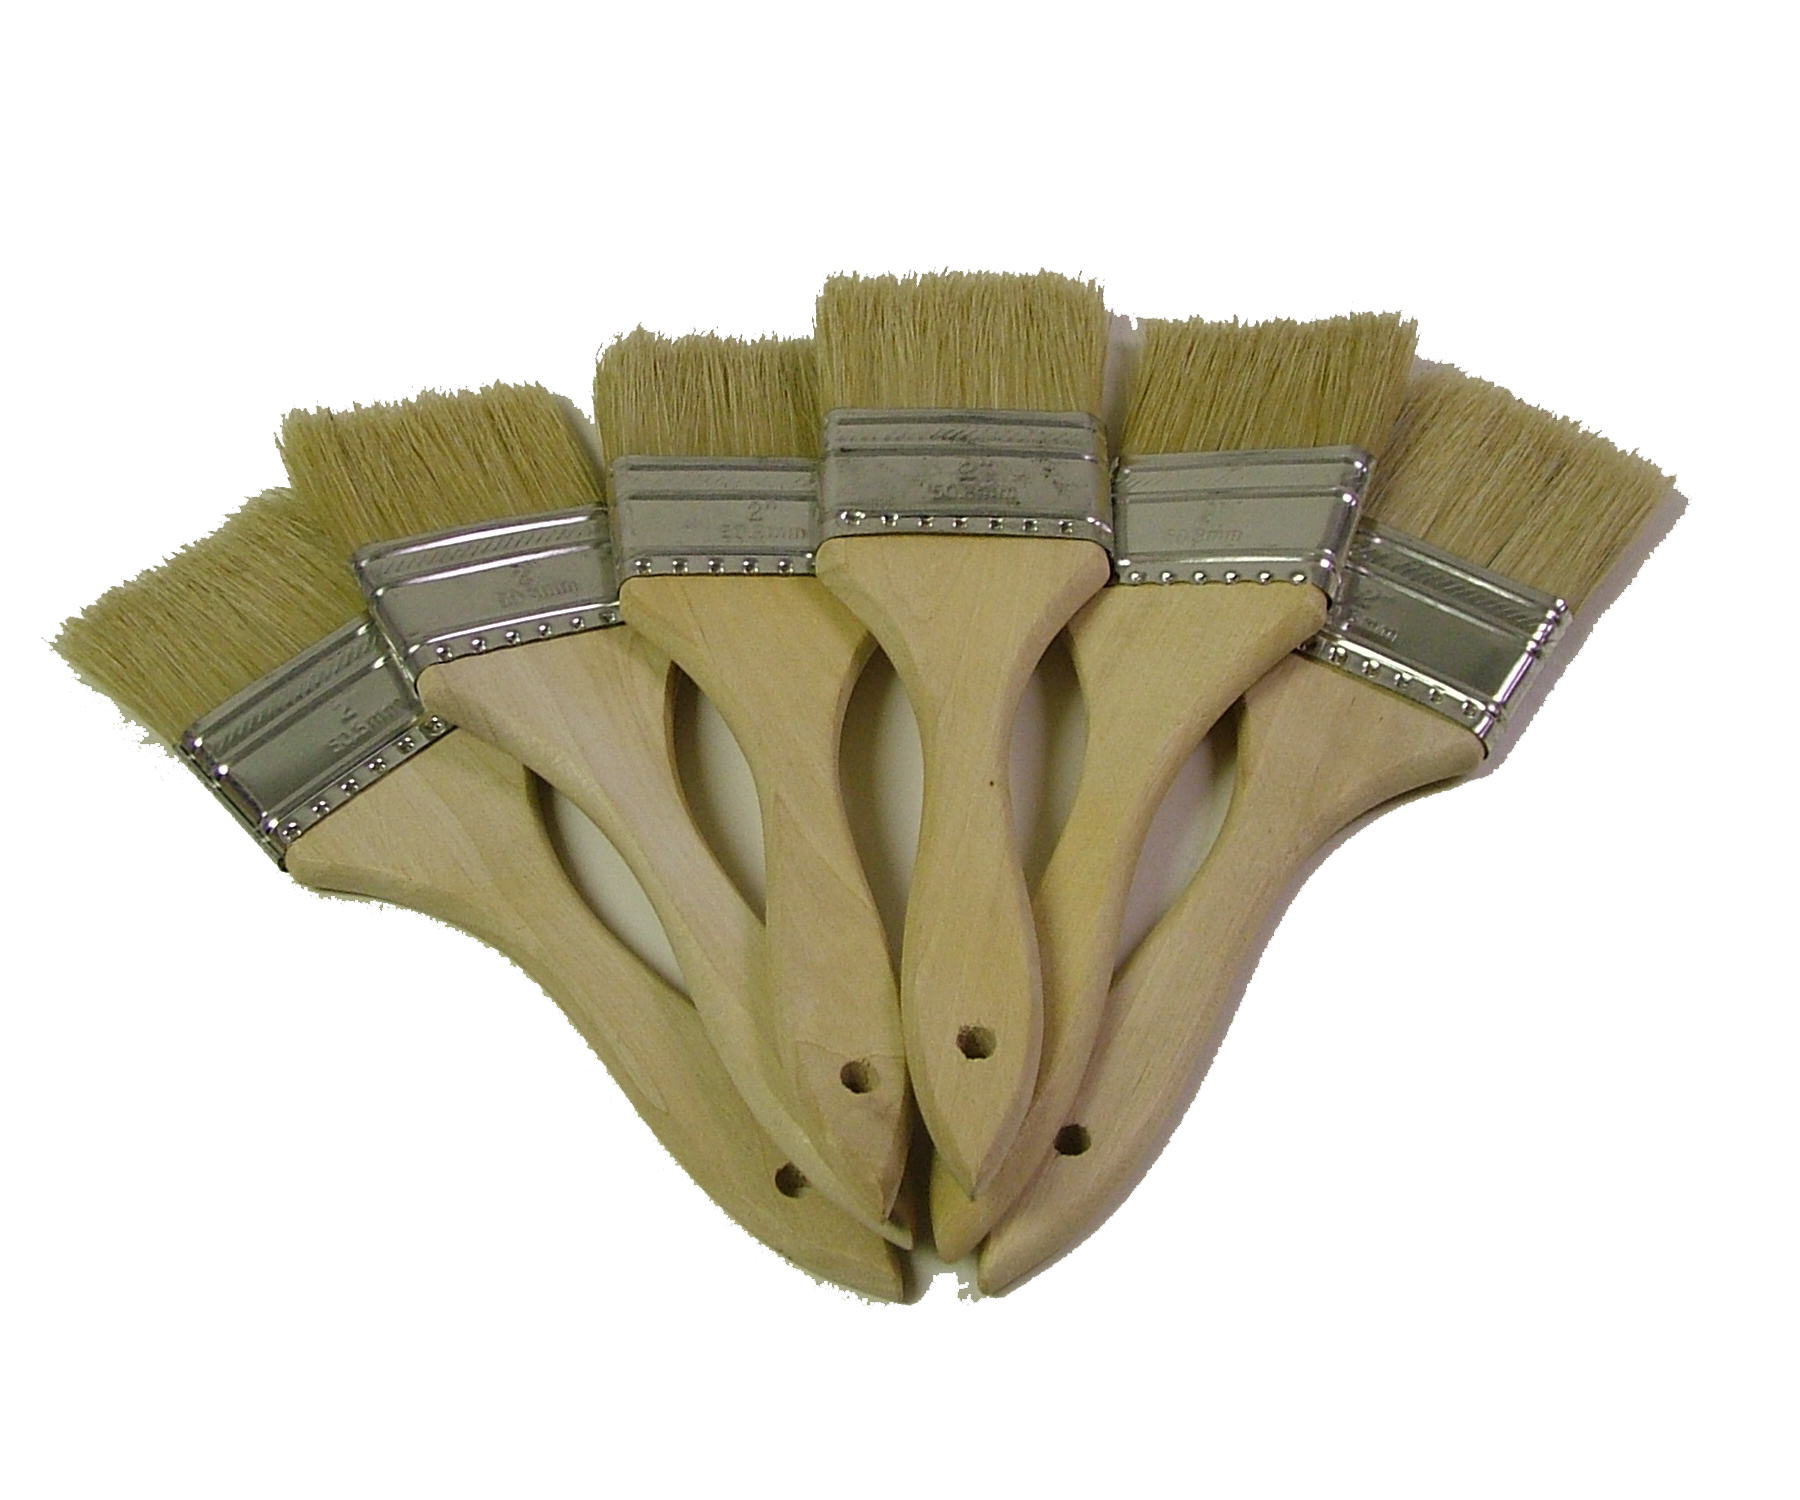 2 Inch Paint Brushes 6 Pack